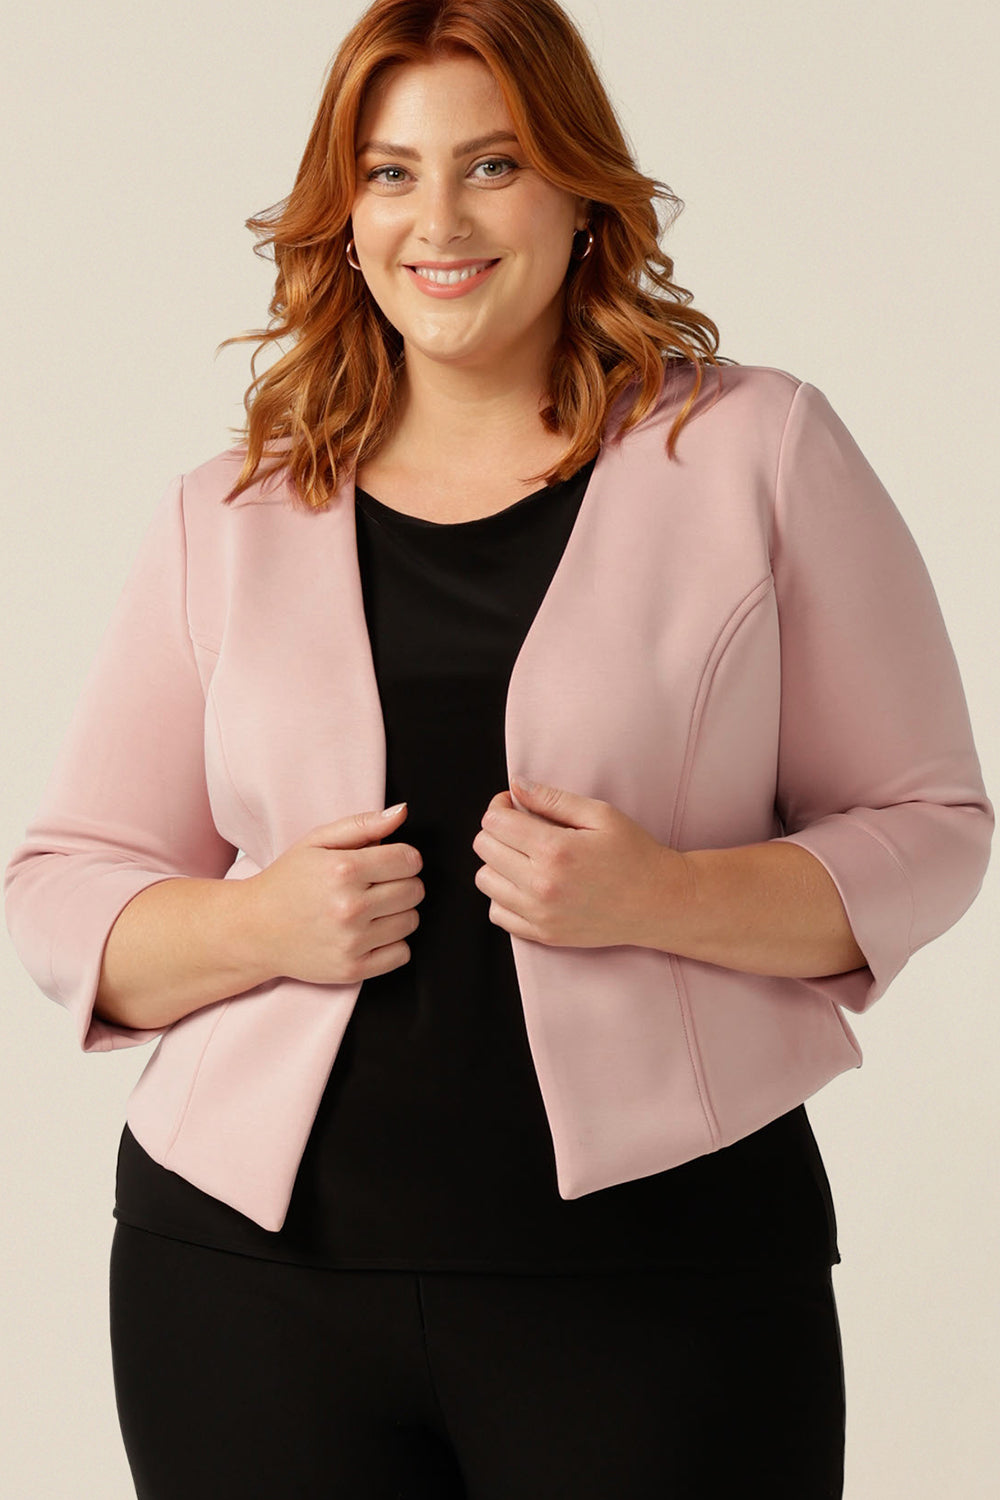 a size 18, plus size woman wears a collarless, open-front pink jacket with 3/4 sleeves. Made in Australia from stretch modal, a sustainable natural fibre, this is an eco-conscious quality corporate jacket. The sustainably-produced women's jacket is worn with a black jersey top and comfortable black work trousers.